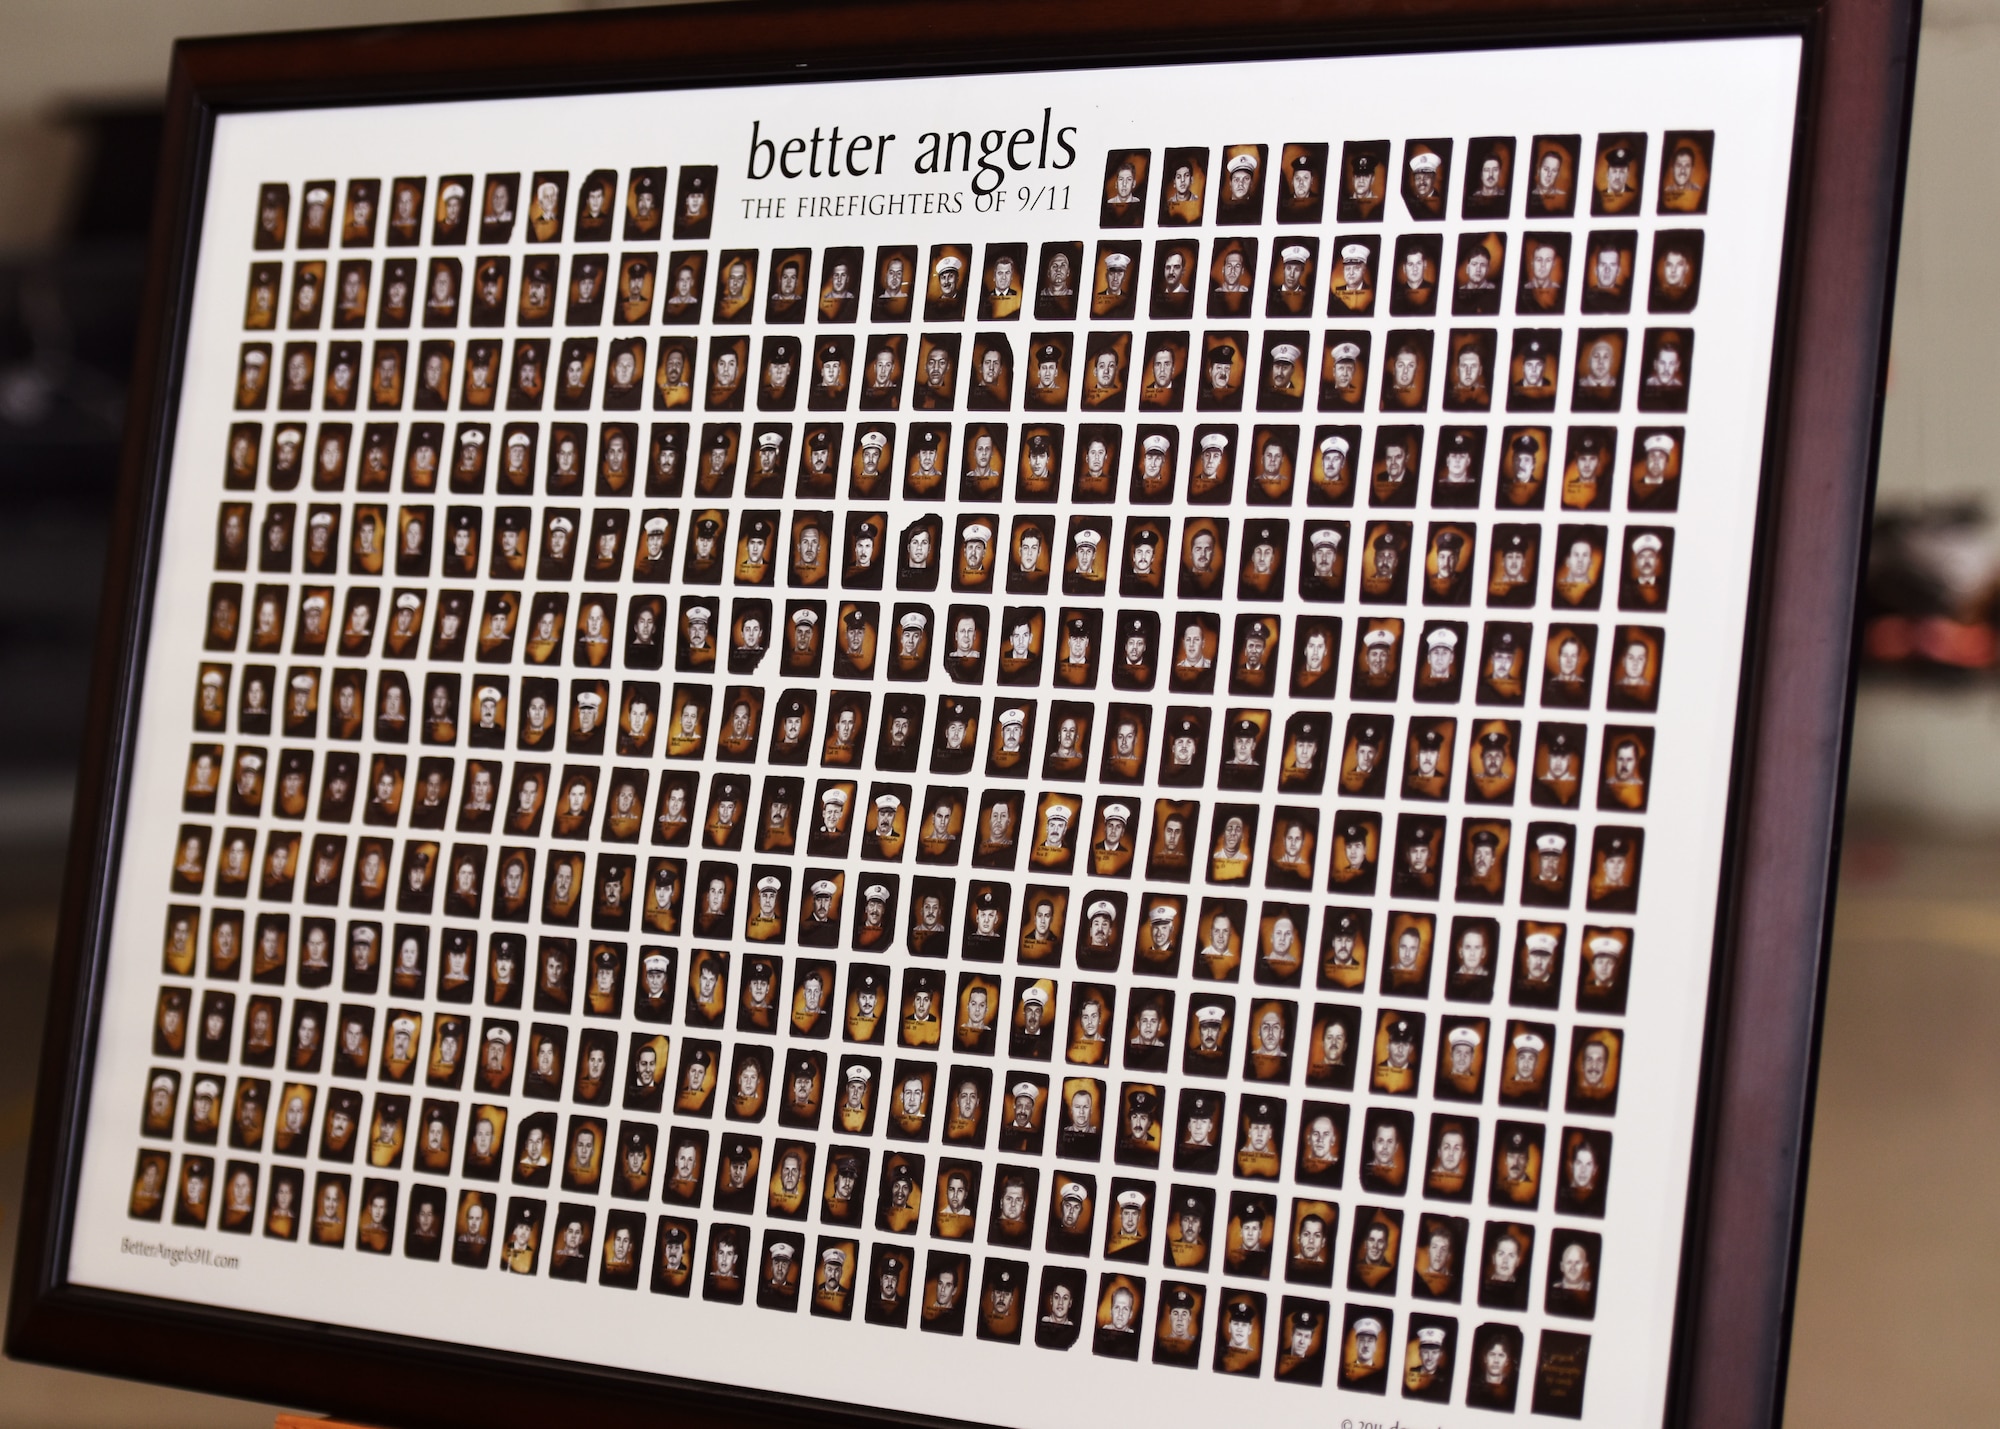 The portraits of 343 firefighters who laid down their lives for others during the tragic events of 9/11 displayed during the Firefighter Remembrance Ceremony held at the Department of Defense Louis F. Garland Fire Academy at Goodfellow Air Force Base, Texas, Sept. 11, 2019. Of the nearly 3,000 victims killed in the collapse, 343 were firefighters, 37 were Port Authority Police Officers, 23 were New York City Police Officers, 8 were emergency medical technicians and 1 patrolman from the New York Fire Patrol. (U.S. Air Force photo by Senior Airman Seraiah Wolf/Released)